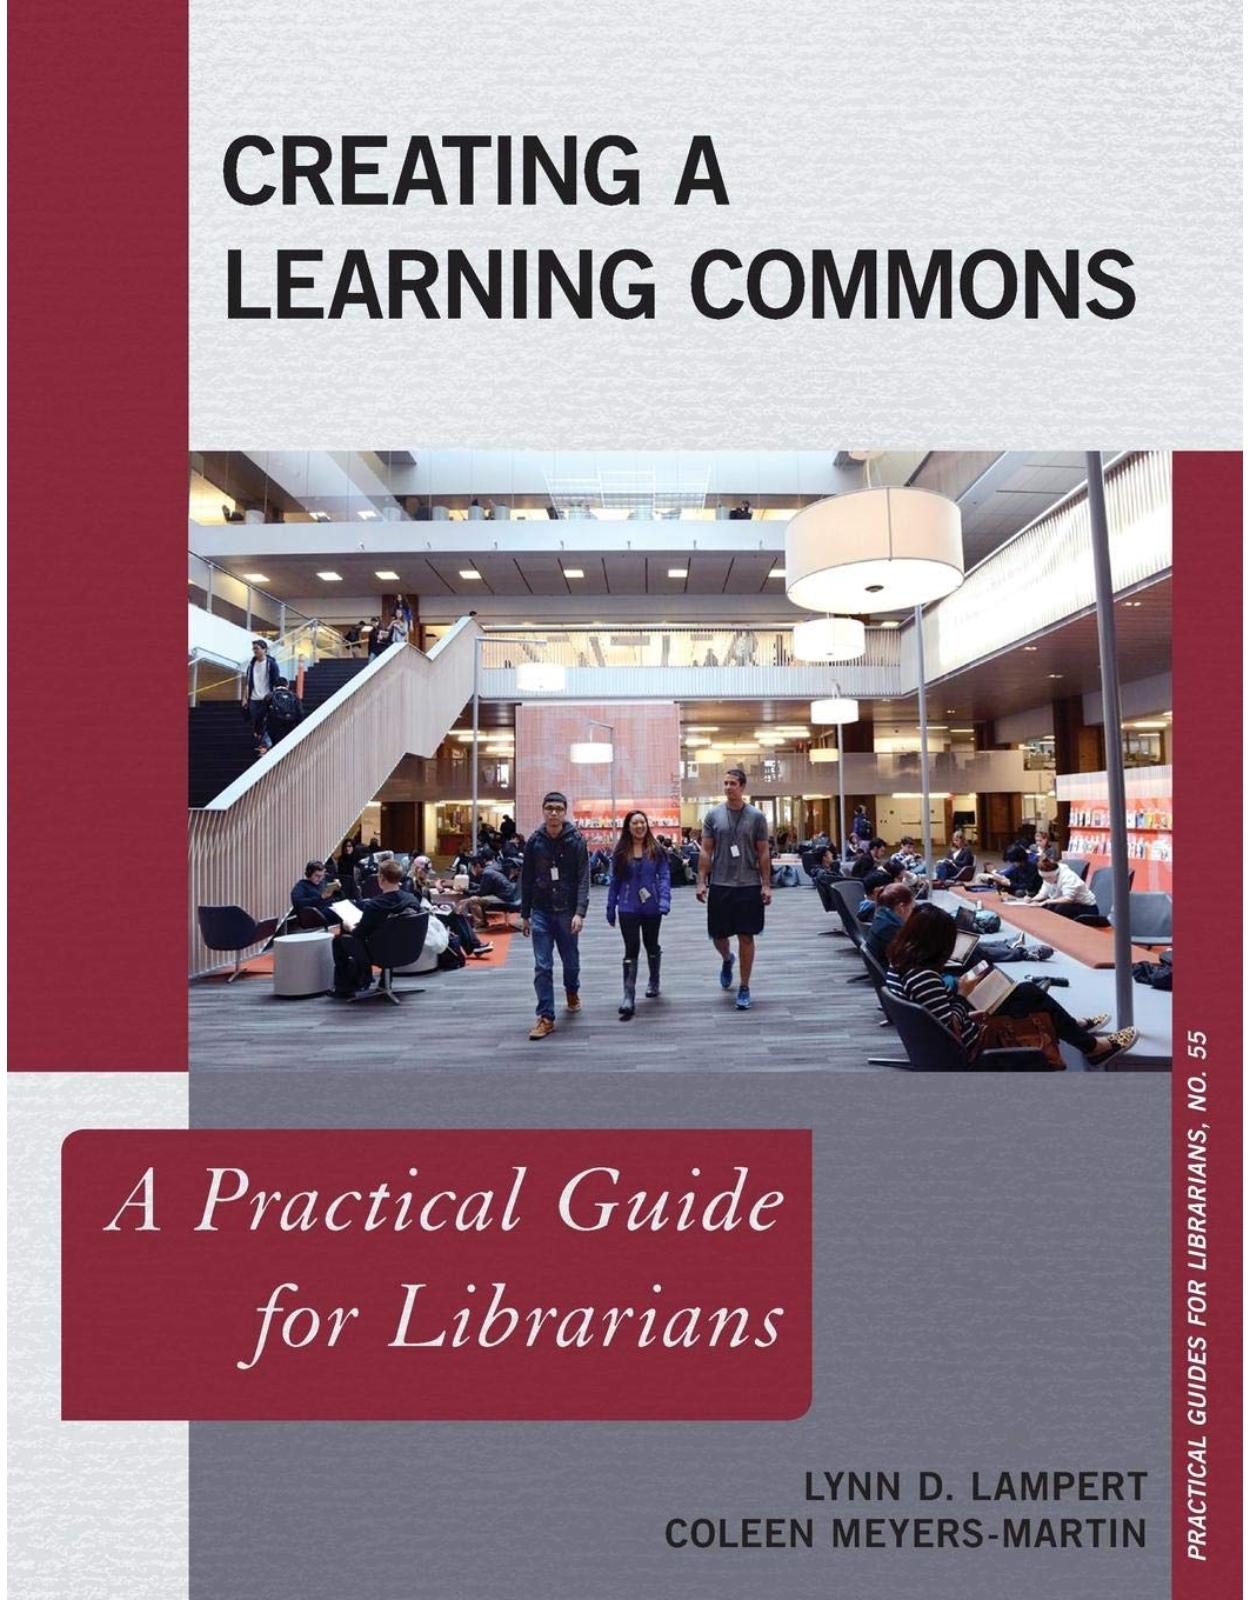 Creating a Learning Commons. A Practical Guide for Librarians